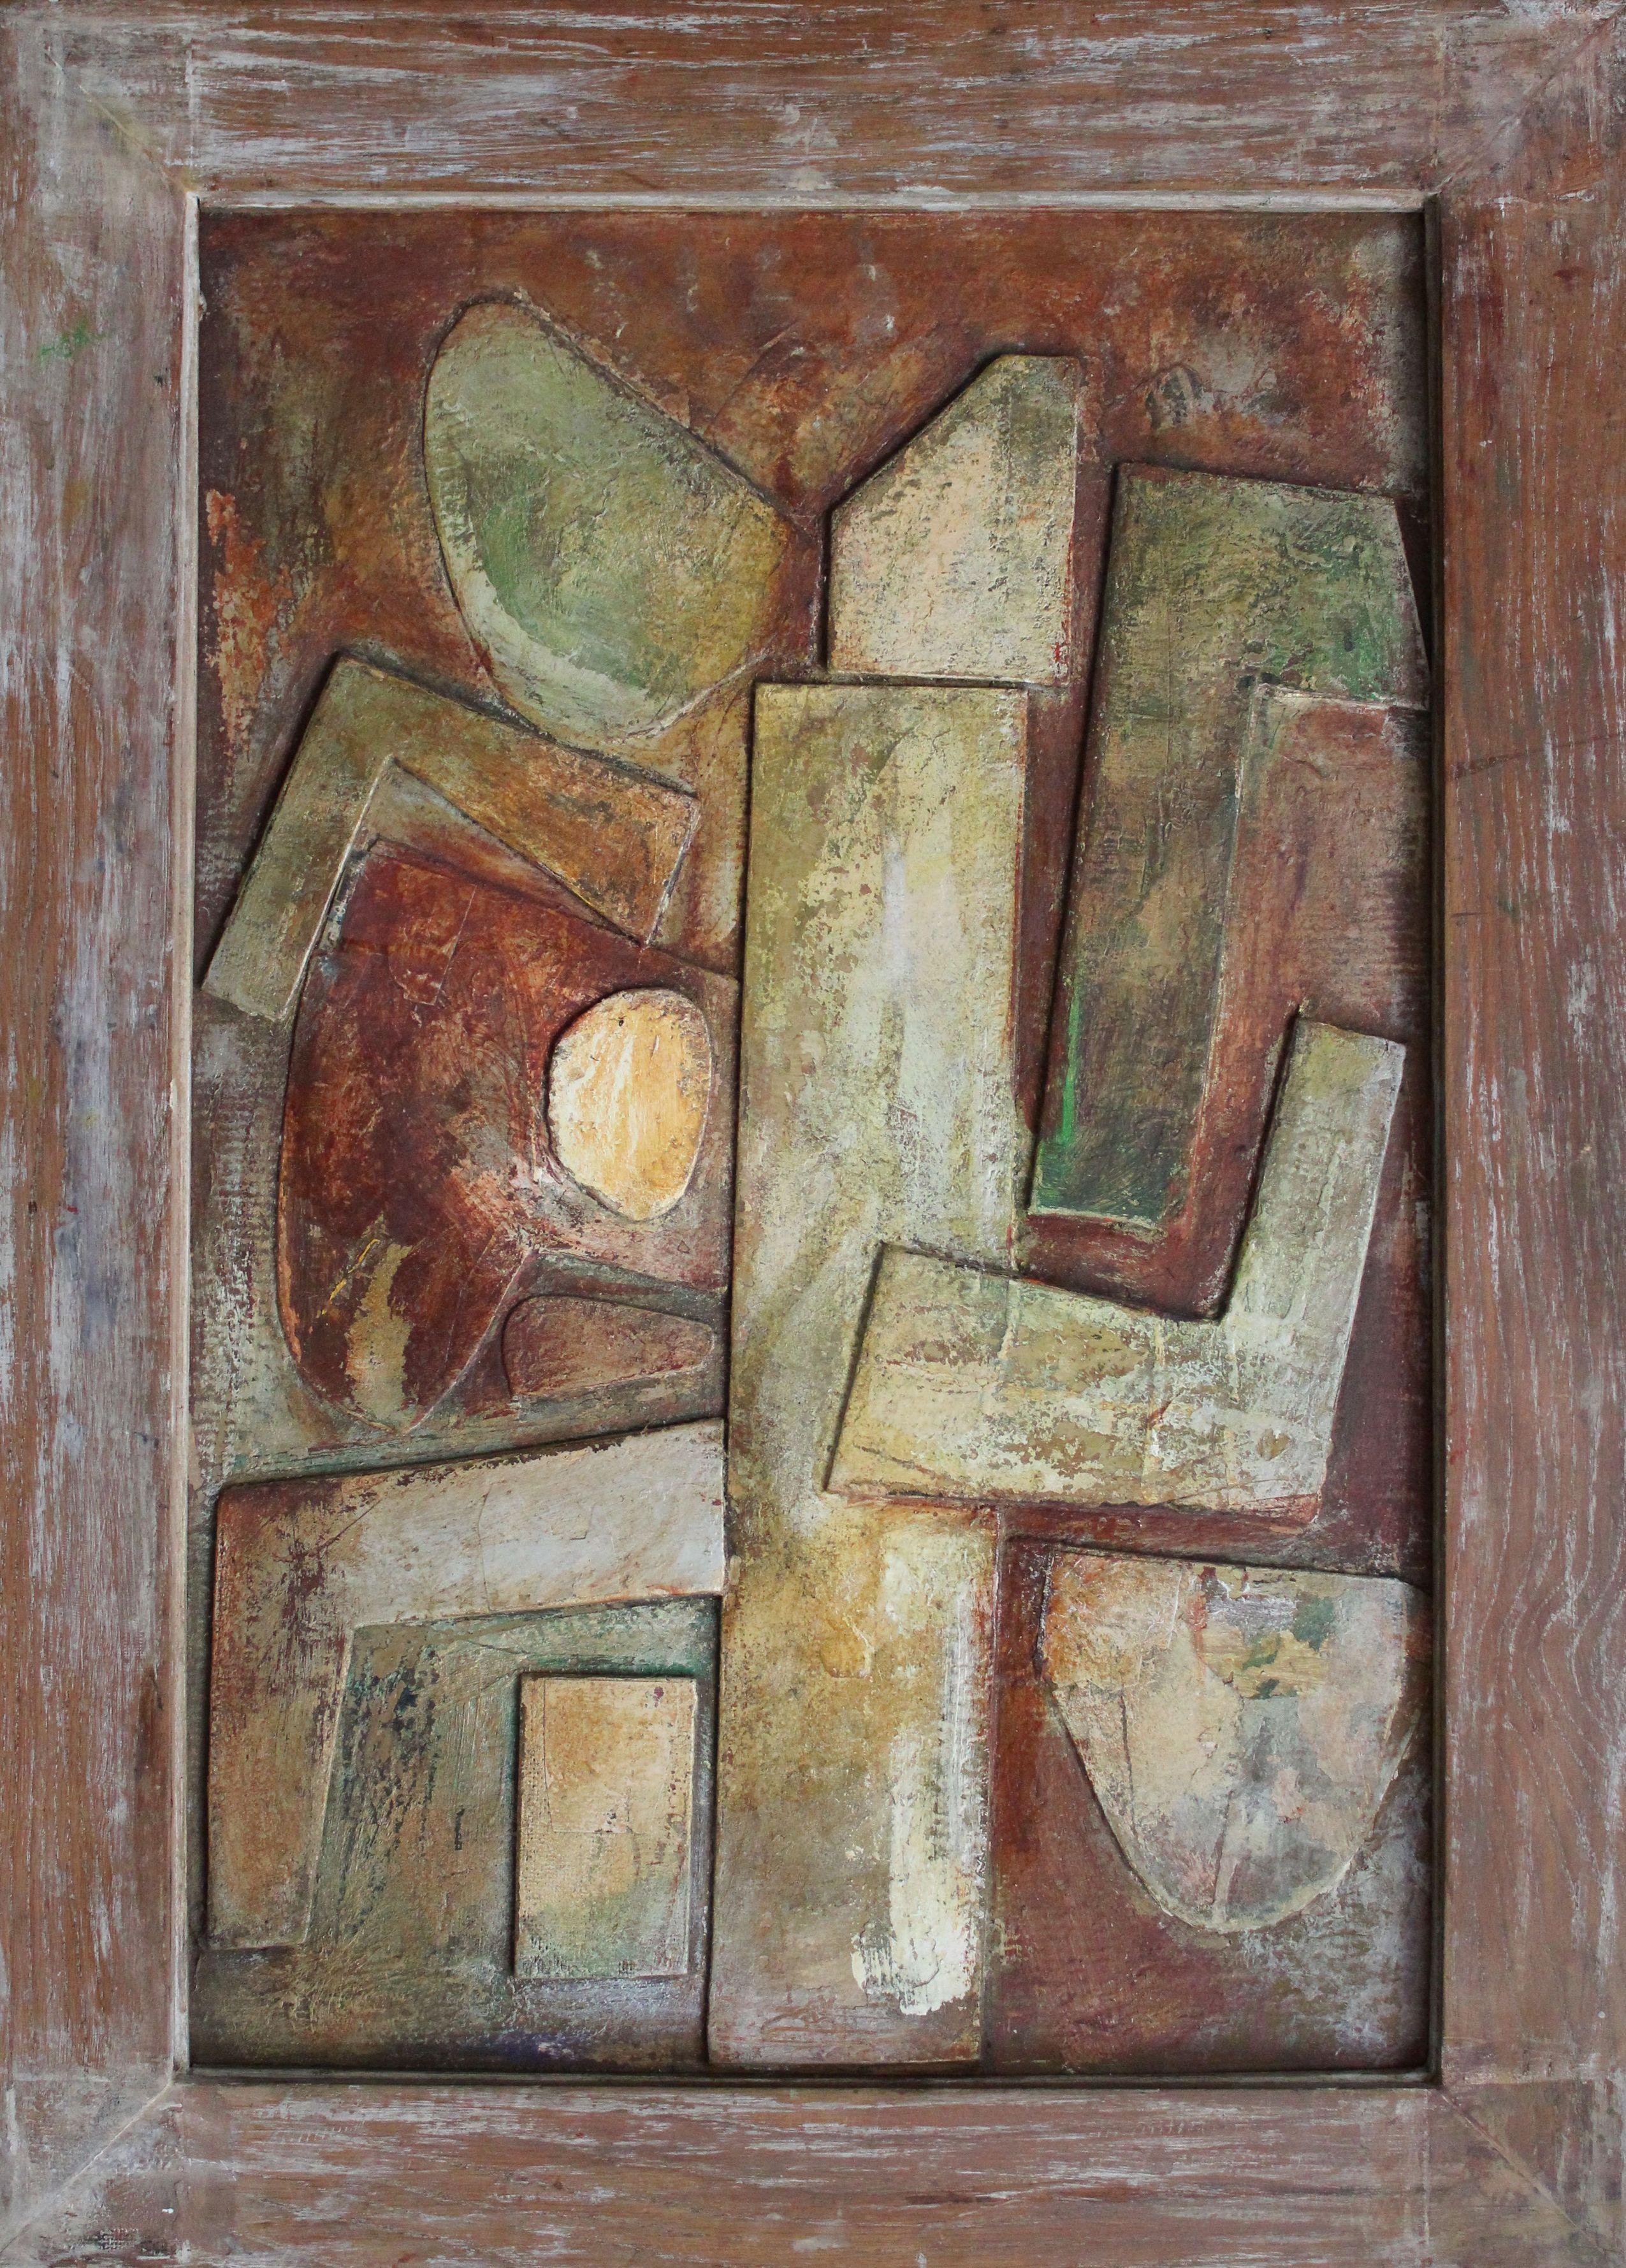 Dedication to Picasso. 1993, Assemblage, Karton, Holz, Acryl, 68 x 47 cm – Painting von Georgs Barkans